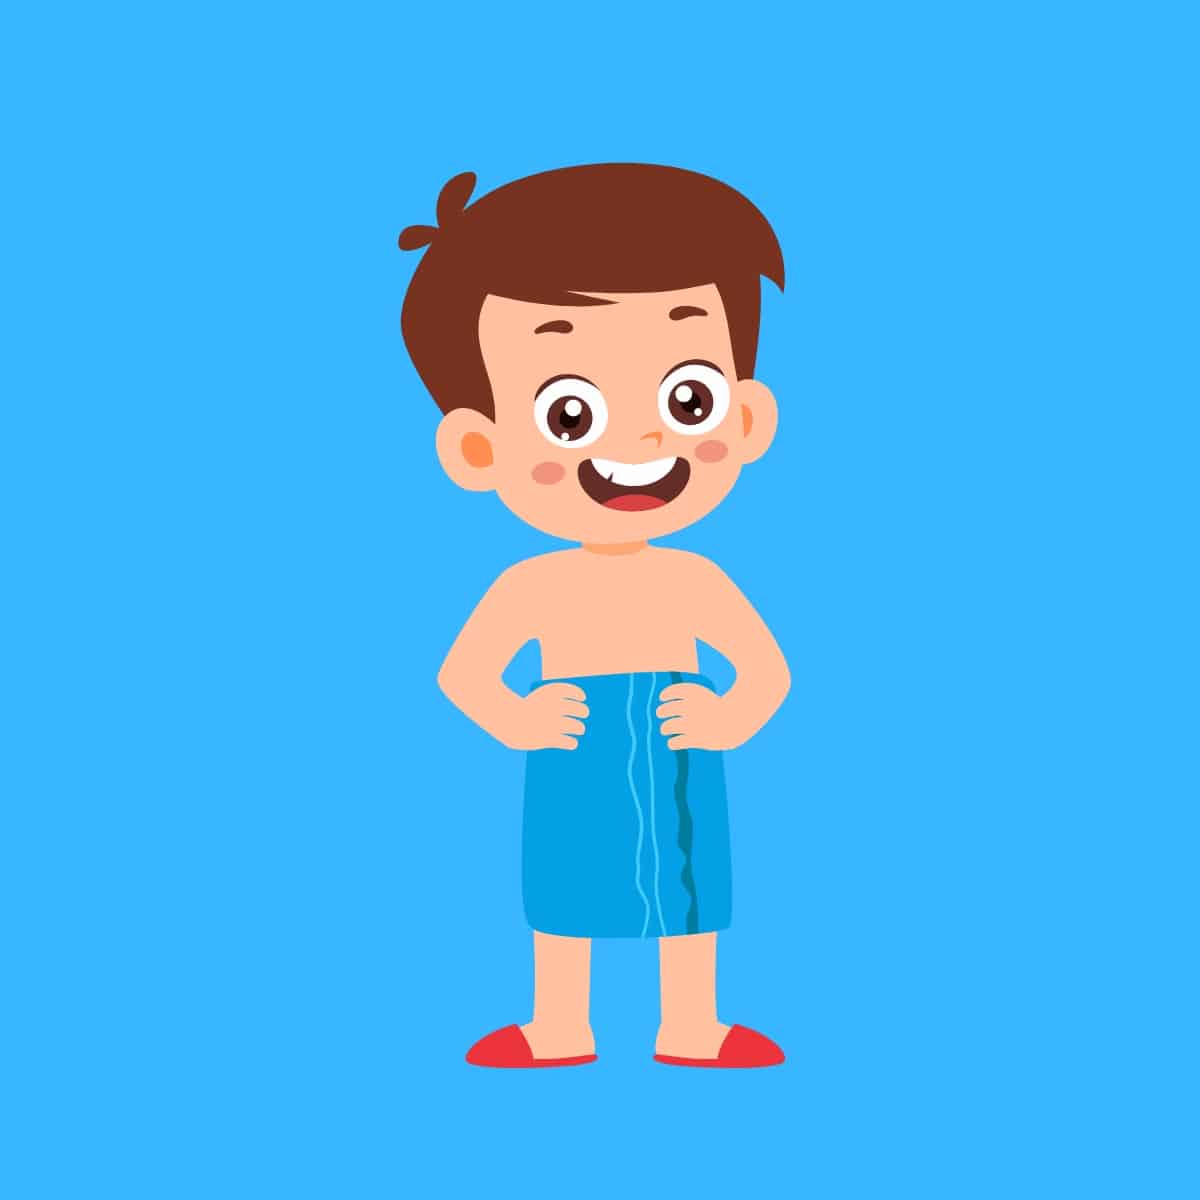 Cartoon graphic of a boy smiling with a blue towel wrapped around his waist on a blue background.